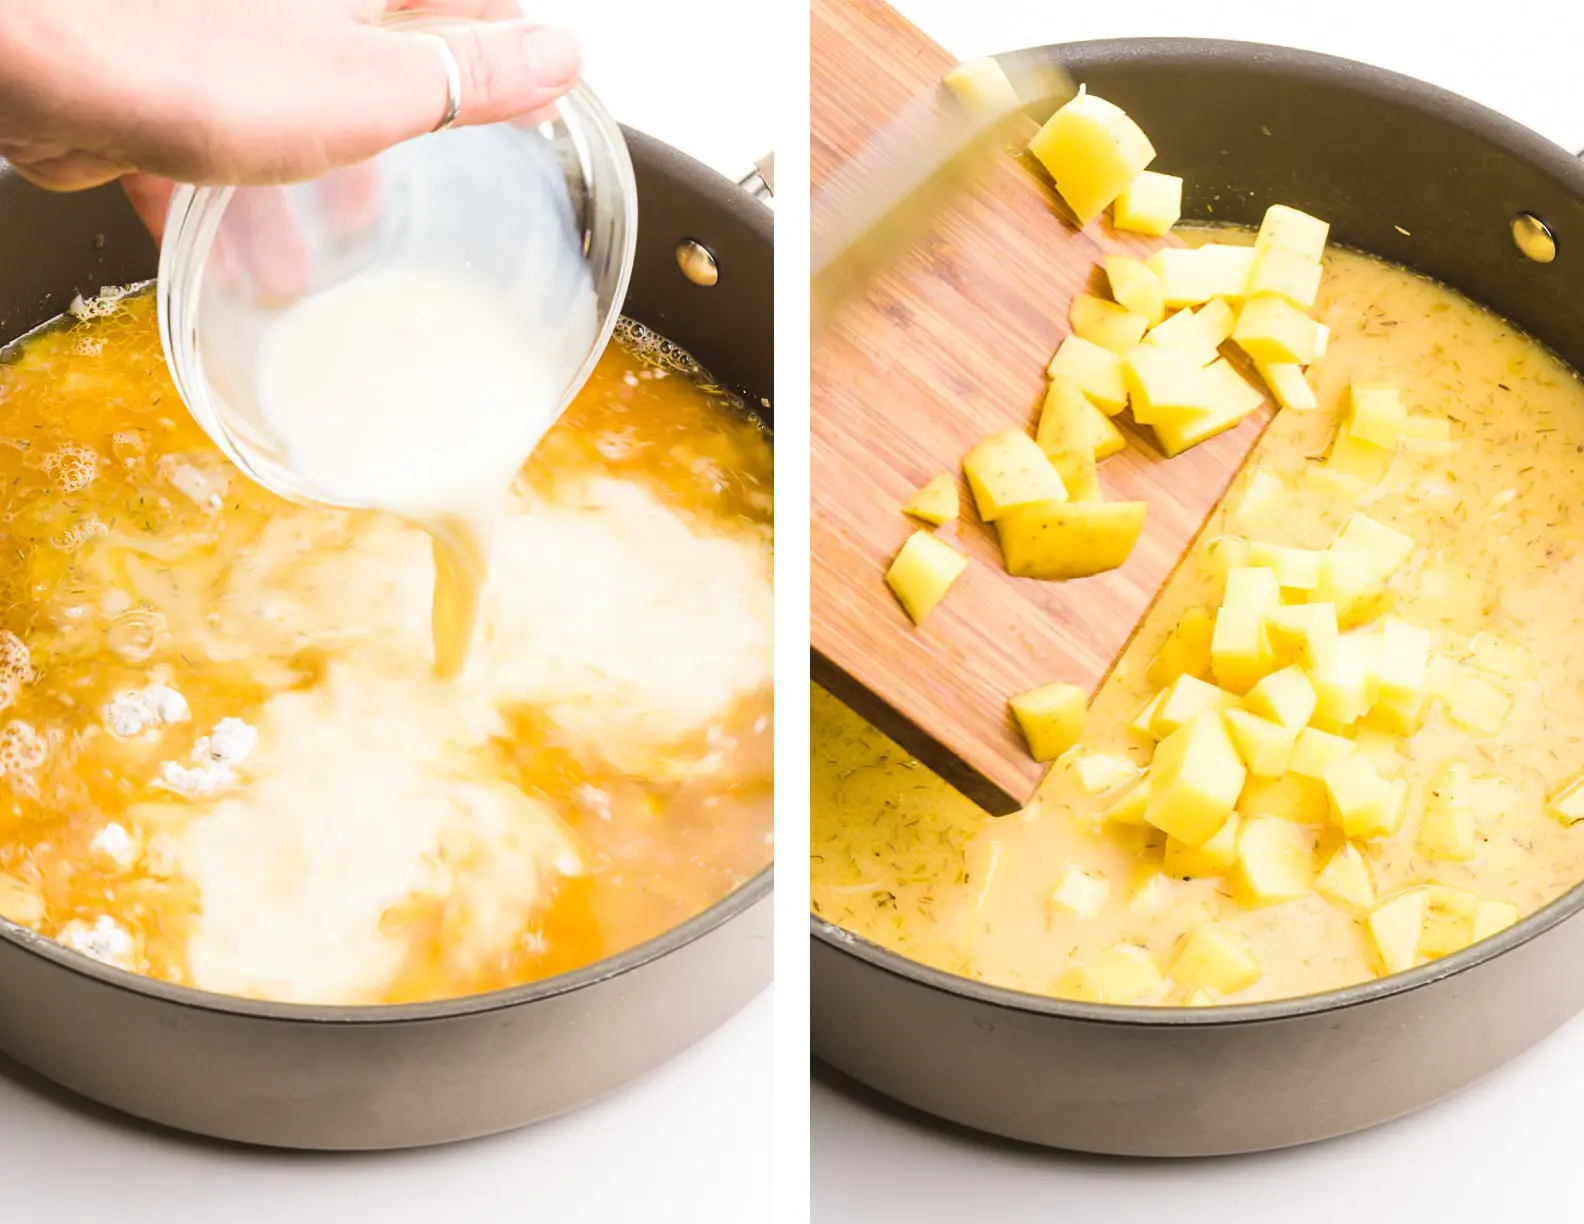 Side-by-side images shows soy milk being poured into a skillet with broth on the left and cubed potatoes being added to that mixture on the right.